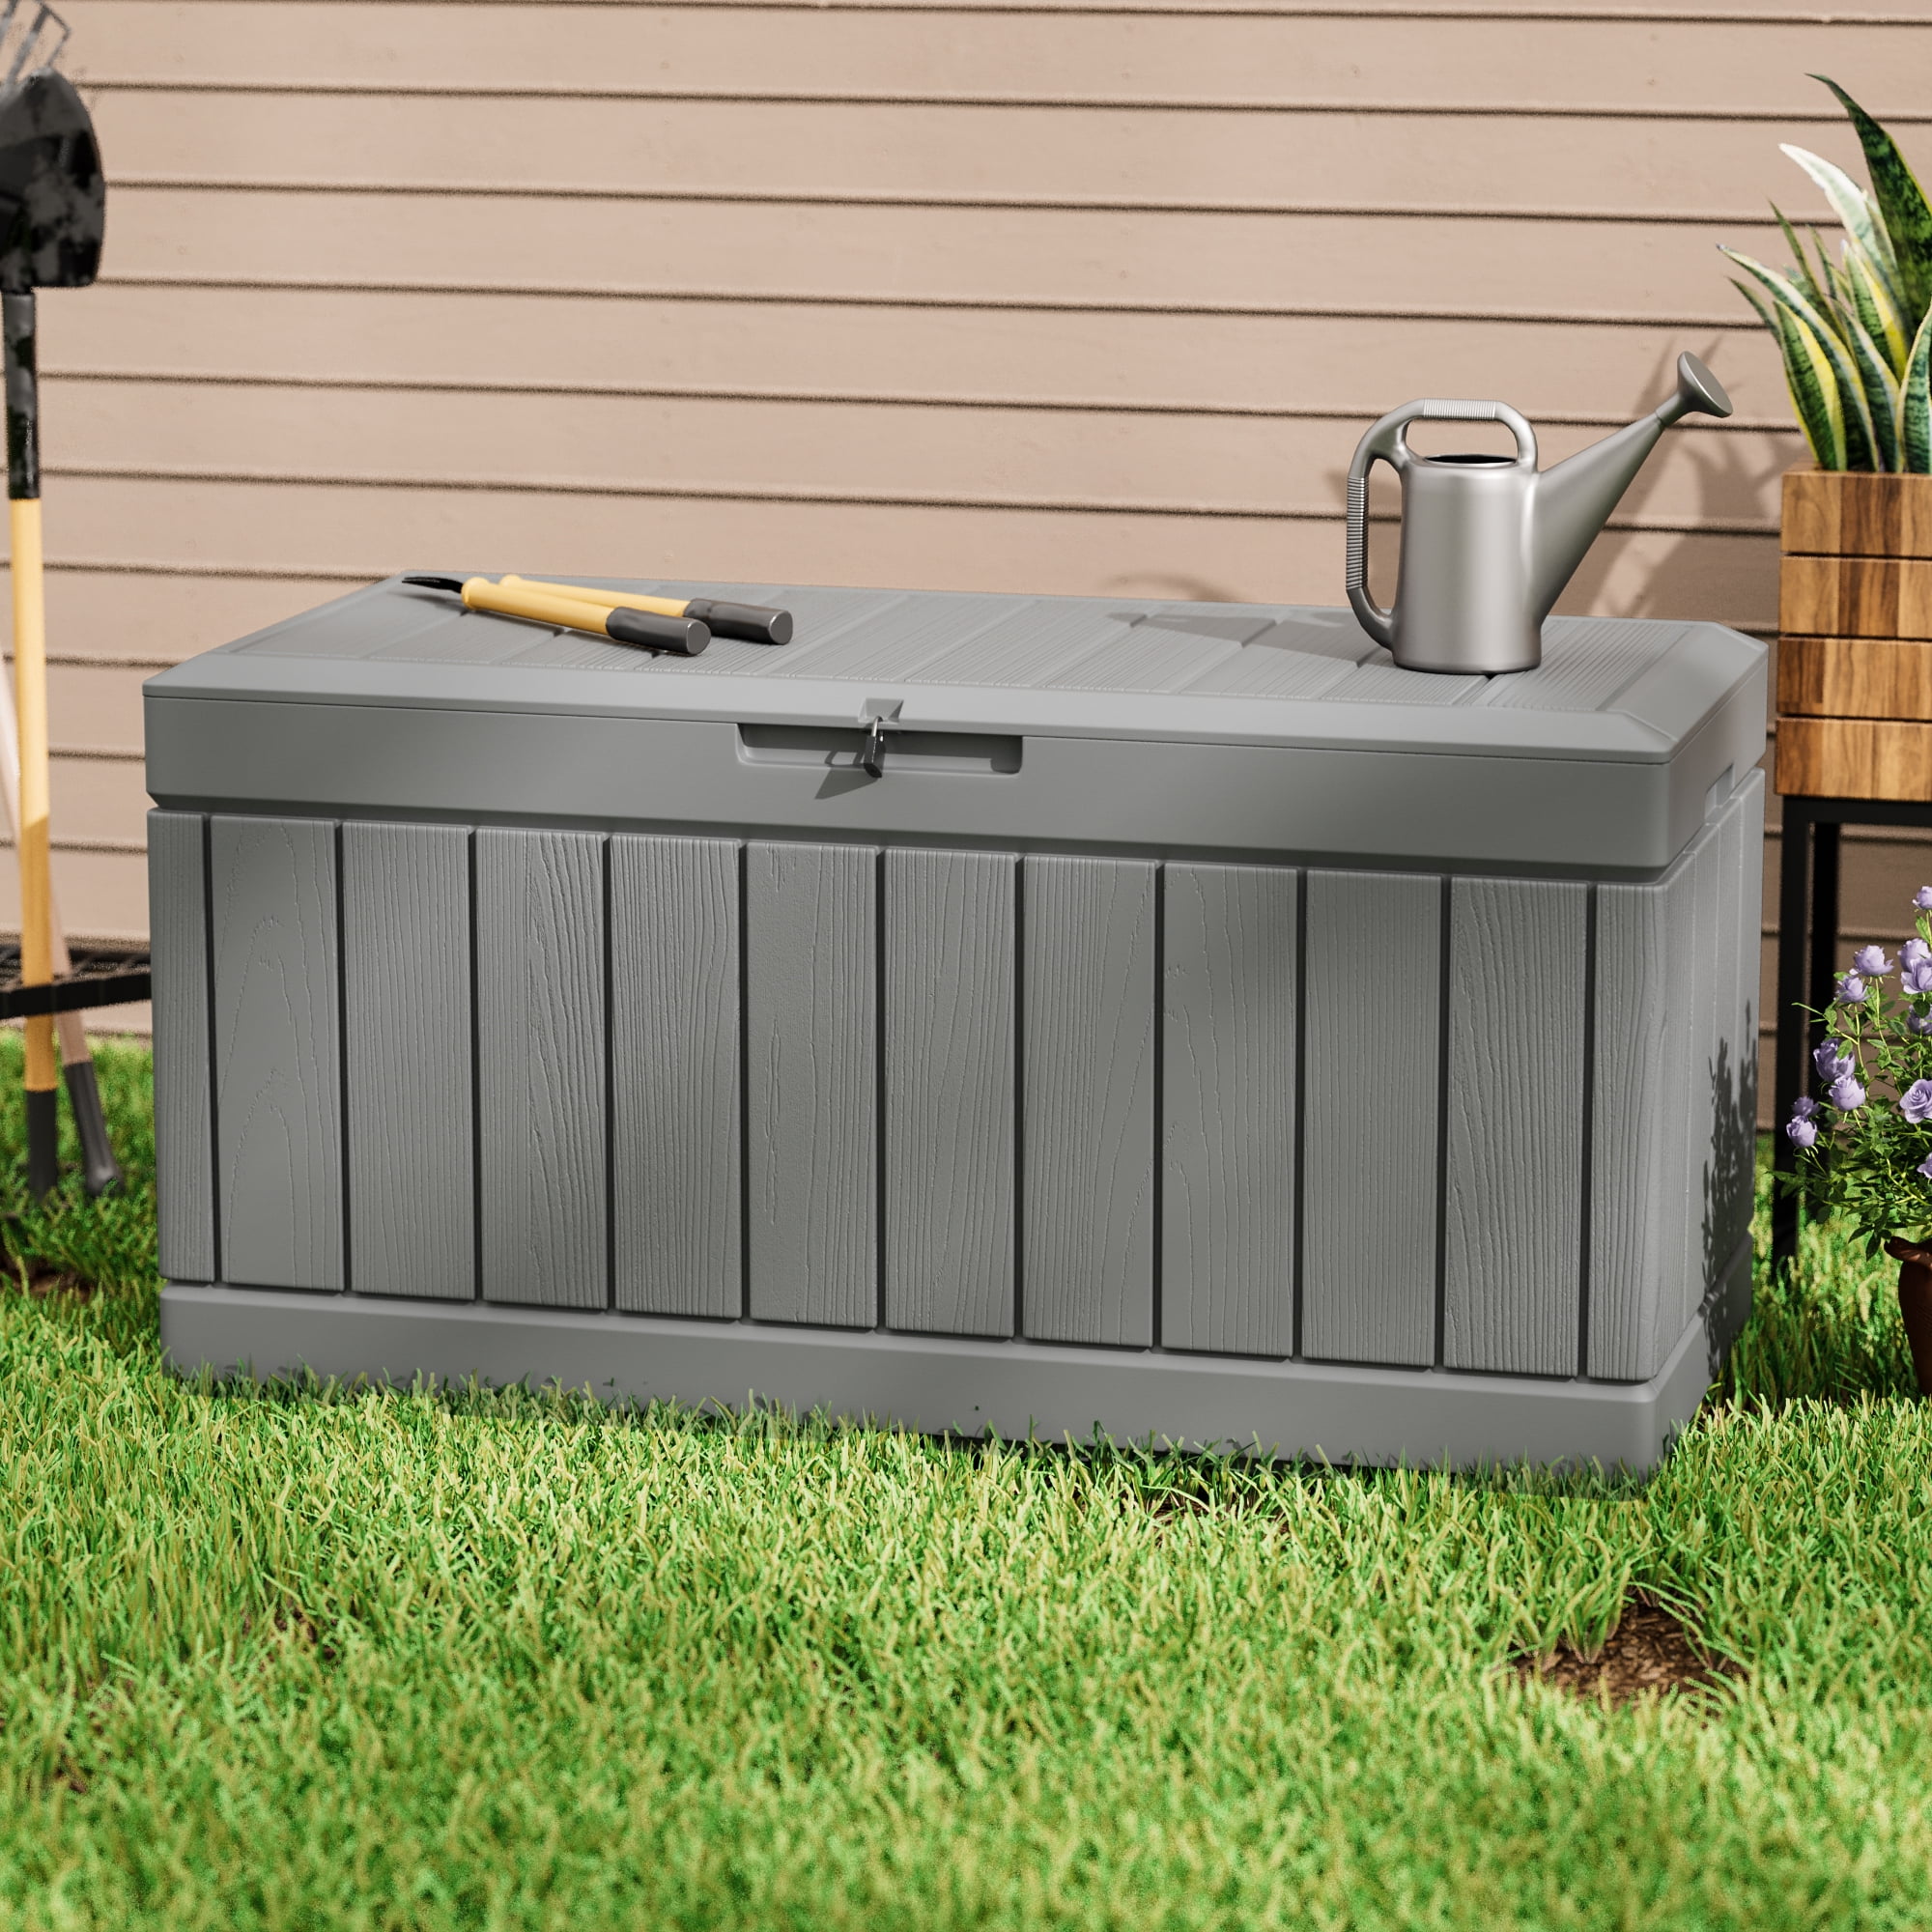 82 Gallon Resin Deck Box Large Outdoor Storage for Patio Furniture, Garden Tools, Pool Gray